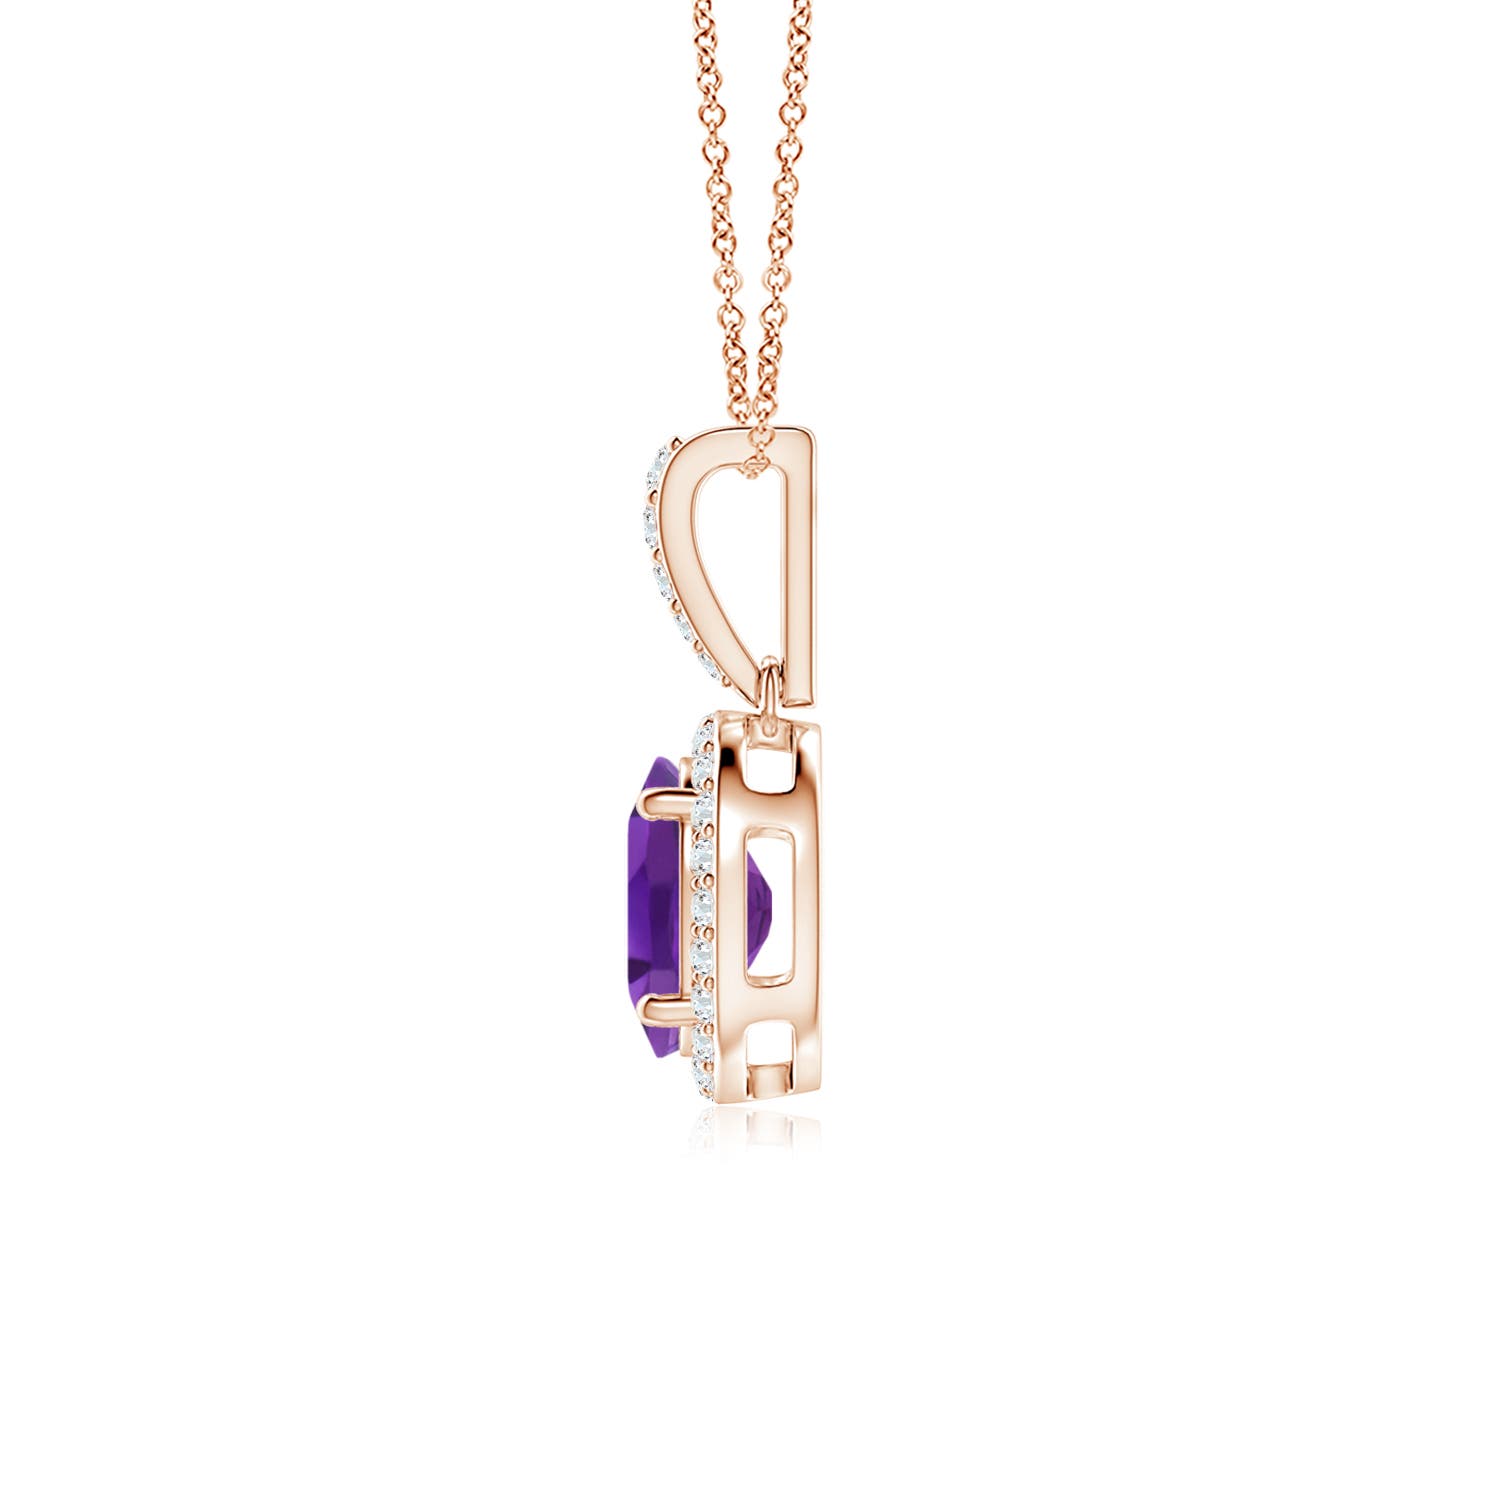 AAA - Amethyst / 1.34 CT / 14 KT Rose Gold